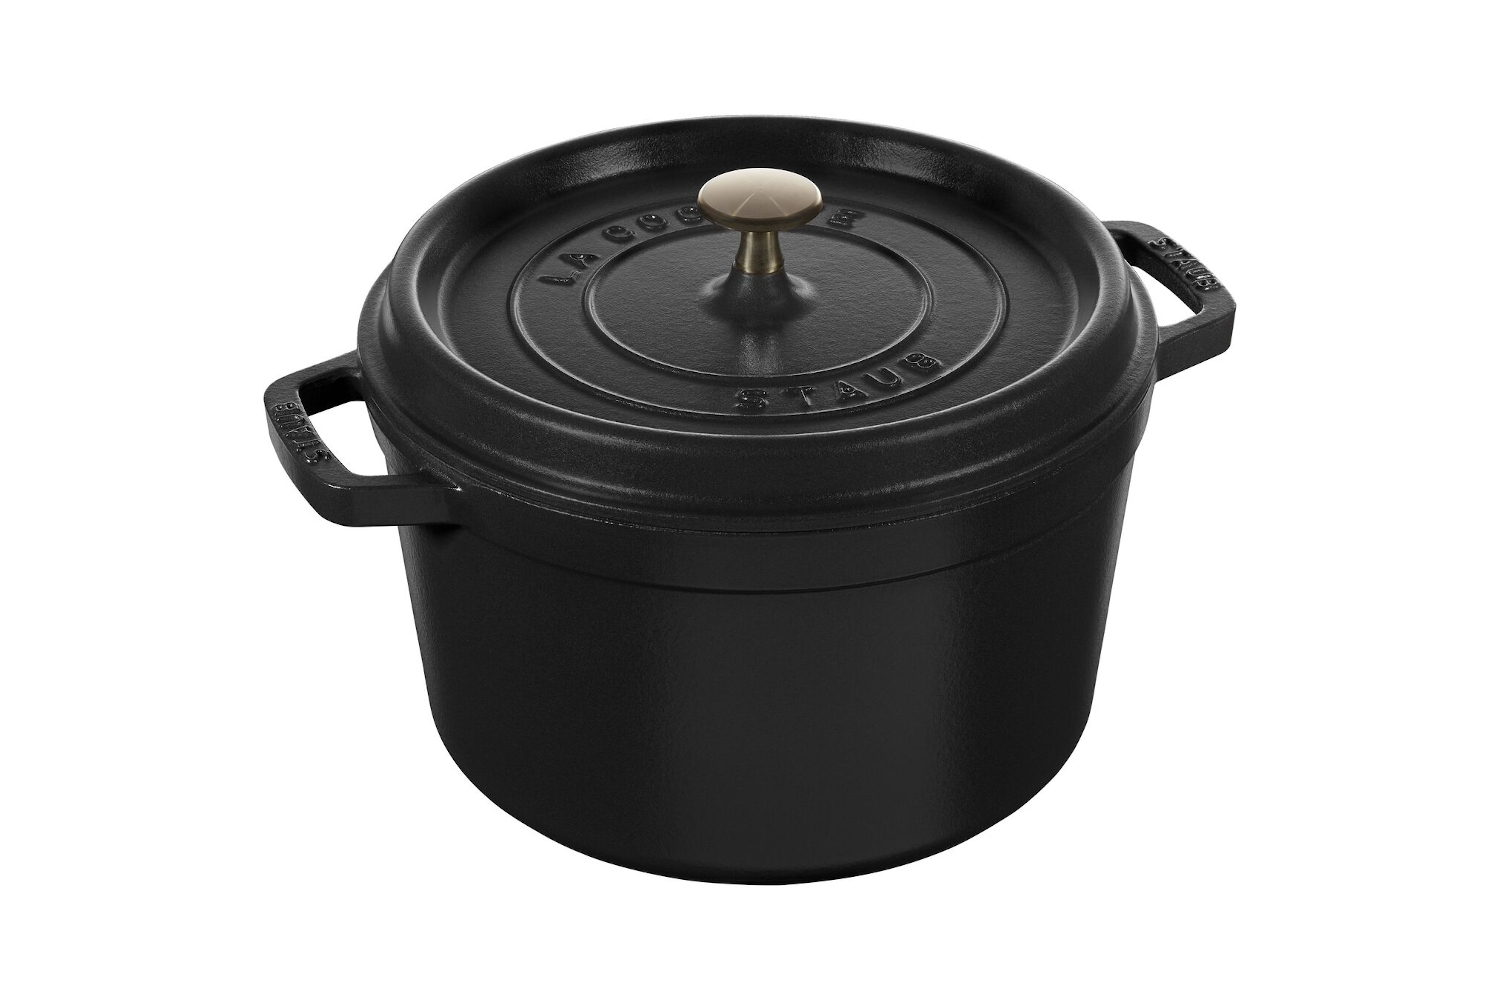 Zwilling Staub 5Qt Grey Tall Round Cocotte - 12502418